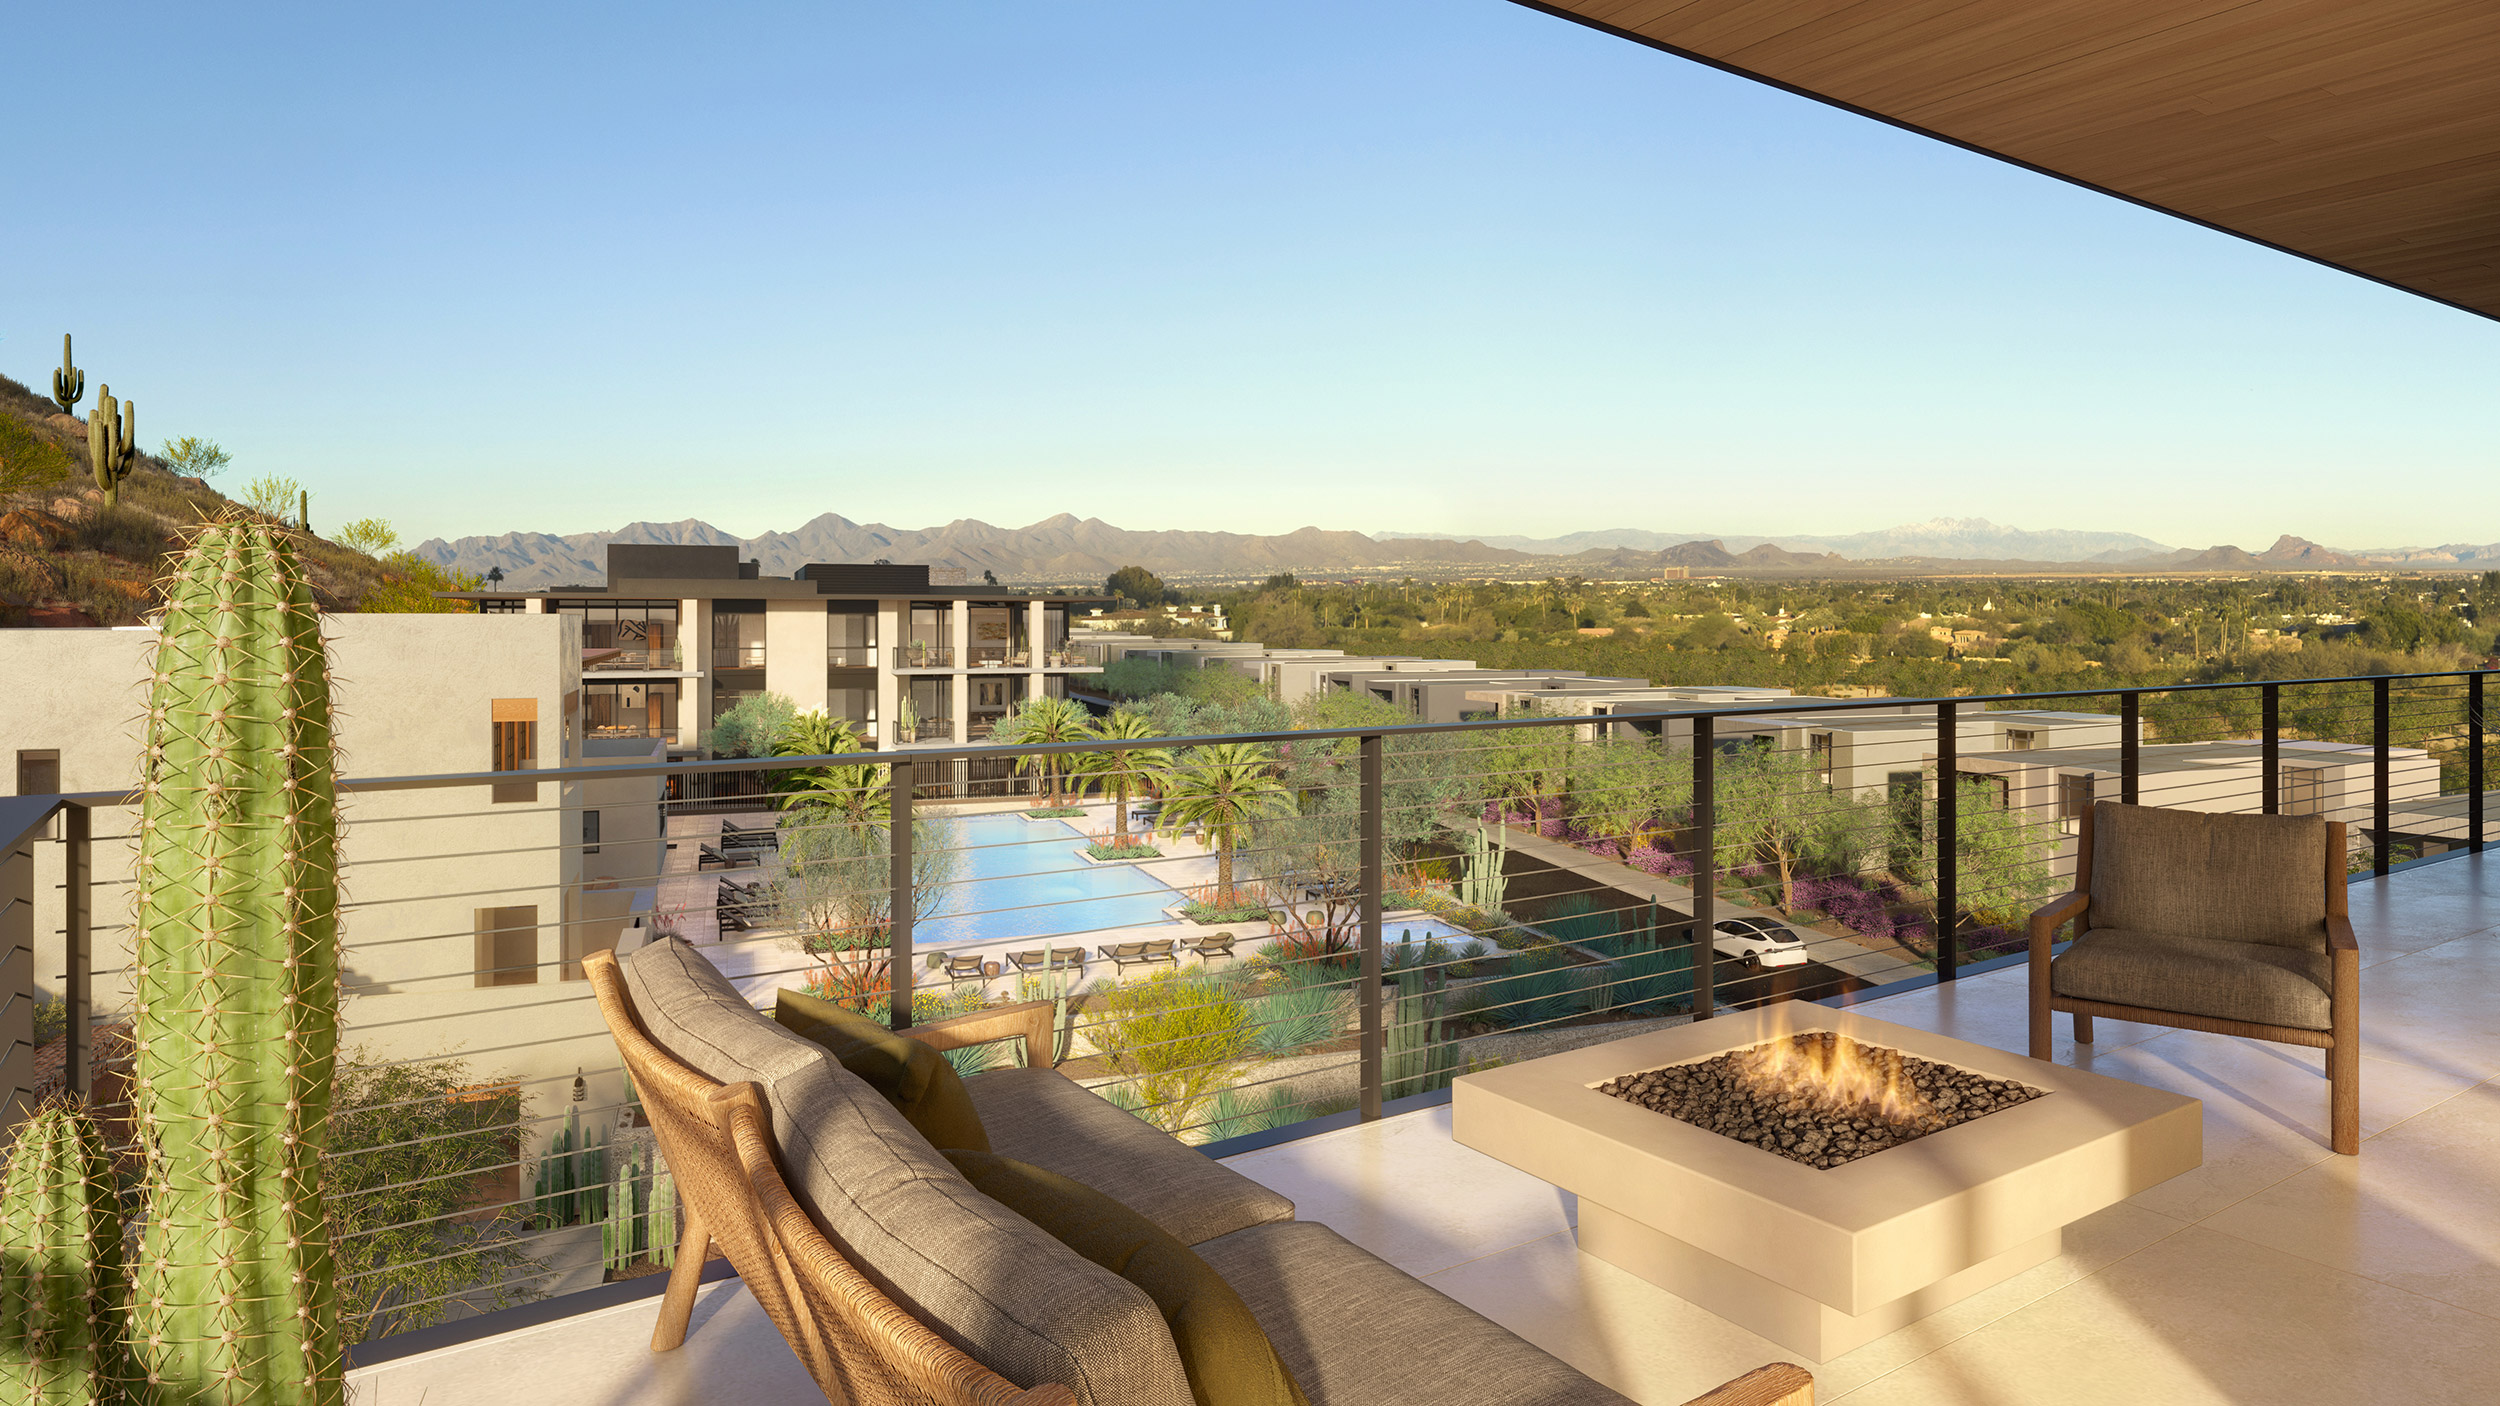 Experience sweeping views of the valley and landscaped cactus gardens.